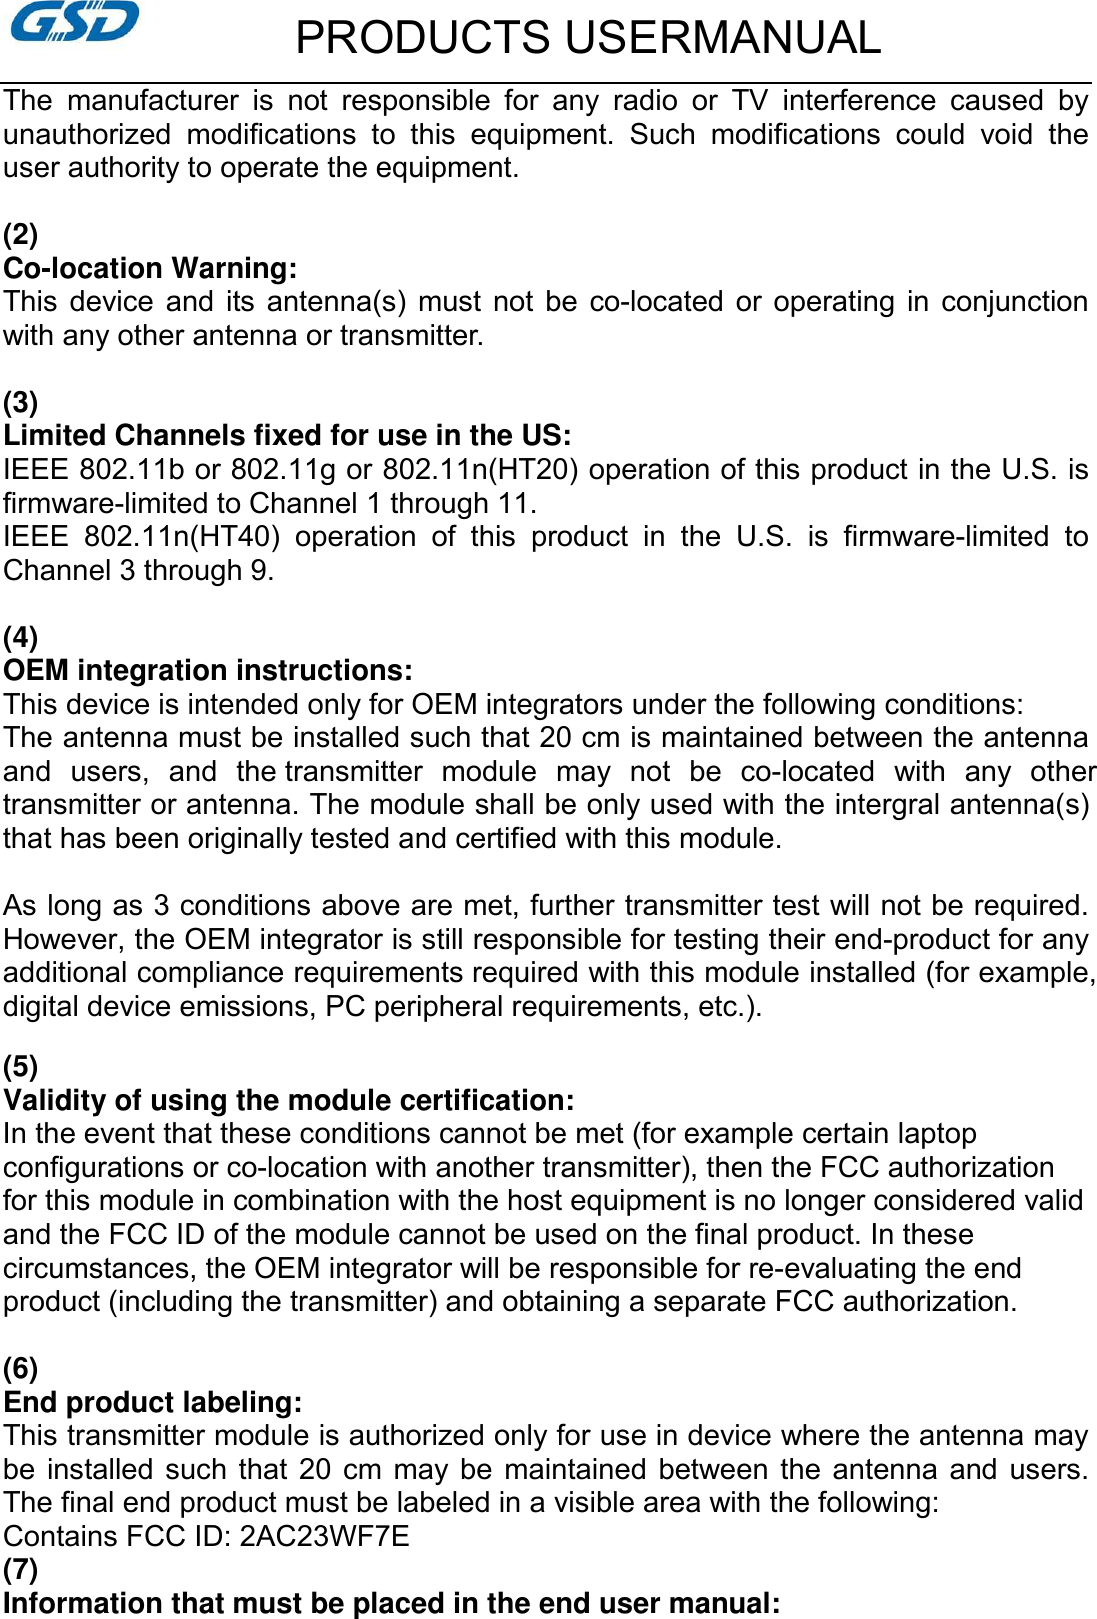         PRODUCTS USERMANUAL The  manufacturer  is  not  responsible  for  any  radio  or  TV  interference  caused  by unauthorized  modifications  to  this  equipment.  Such  modifications  could  void  the user authority to operate the equipment.  (2)   Co-location Warning: This  device  and  its  antenna(s)  must  not  be  co-located  or  operating  in conjunction with any other antenna or transmitter.  (3)   Limited Channels fixed for use in the US: IEEE 802.11b or 802.11g or 802.11n(HT20) operation of this product in the U.S. is firmware-limited to Channel 1 through 11.   IEEE  802.11n(HT40)  operation  of  this  product  in  the  U.S.  is  firmware-limited  to Channel 3 through 9.  (4)   OEM integration instructions: This device is intended only for OEM integrators under the following conditions: The antenna must be installed such that 20 cm is maintained between the antenna and  users,  and  the transmitter  module  may  not  be  co-located  with  any  other transmitter or antenna. The module shall be only used with the intergral antenna(s) that has been originally tested and certified with this module.  As long as 3 conditions above are met, further transmitter test will not be required. However, the OEM integrator is still responsible for testing their end-product for any additional compliance requirements required with this module installed (for example, digital device emissions, PC peripheral requirements, etc.).     (5)      Validity of using the module certification: In the event that these conditions cannot be met (for example certain laptop configurations or co-location with another transmitter), then the FCC authorization for this module in combination with the host equipment is no longer considered valid and the FCC ID of the module cannot be used on the final product. In these circumstances, the OEM integrator will be responsible for re-evaluating the end product (including the transmitter) and obtaining a separate FCC authorization.  (6) End product labeling: This transmitter module is authorized only for use in device where the antenna may be  installed such that  20  cm  may be  maintained  between the antenna and  users. The final end product must be labeled in a visible area with the following: Contains FCC ID: 2AC23WF7E (7) Information that must be placed in the end user manual: 